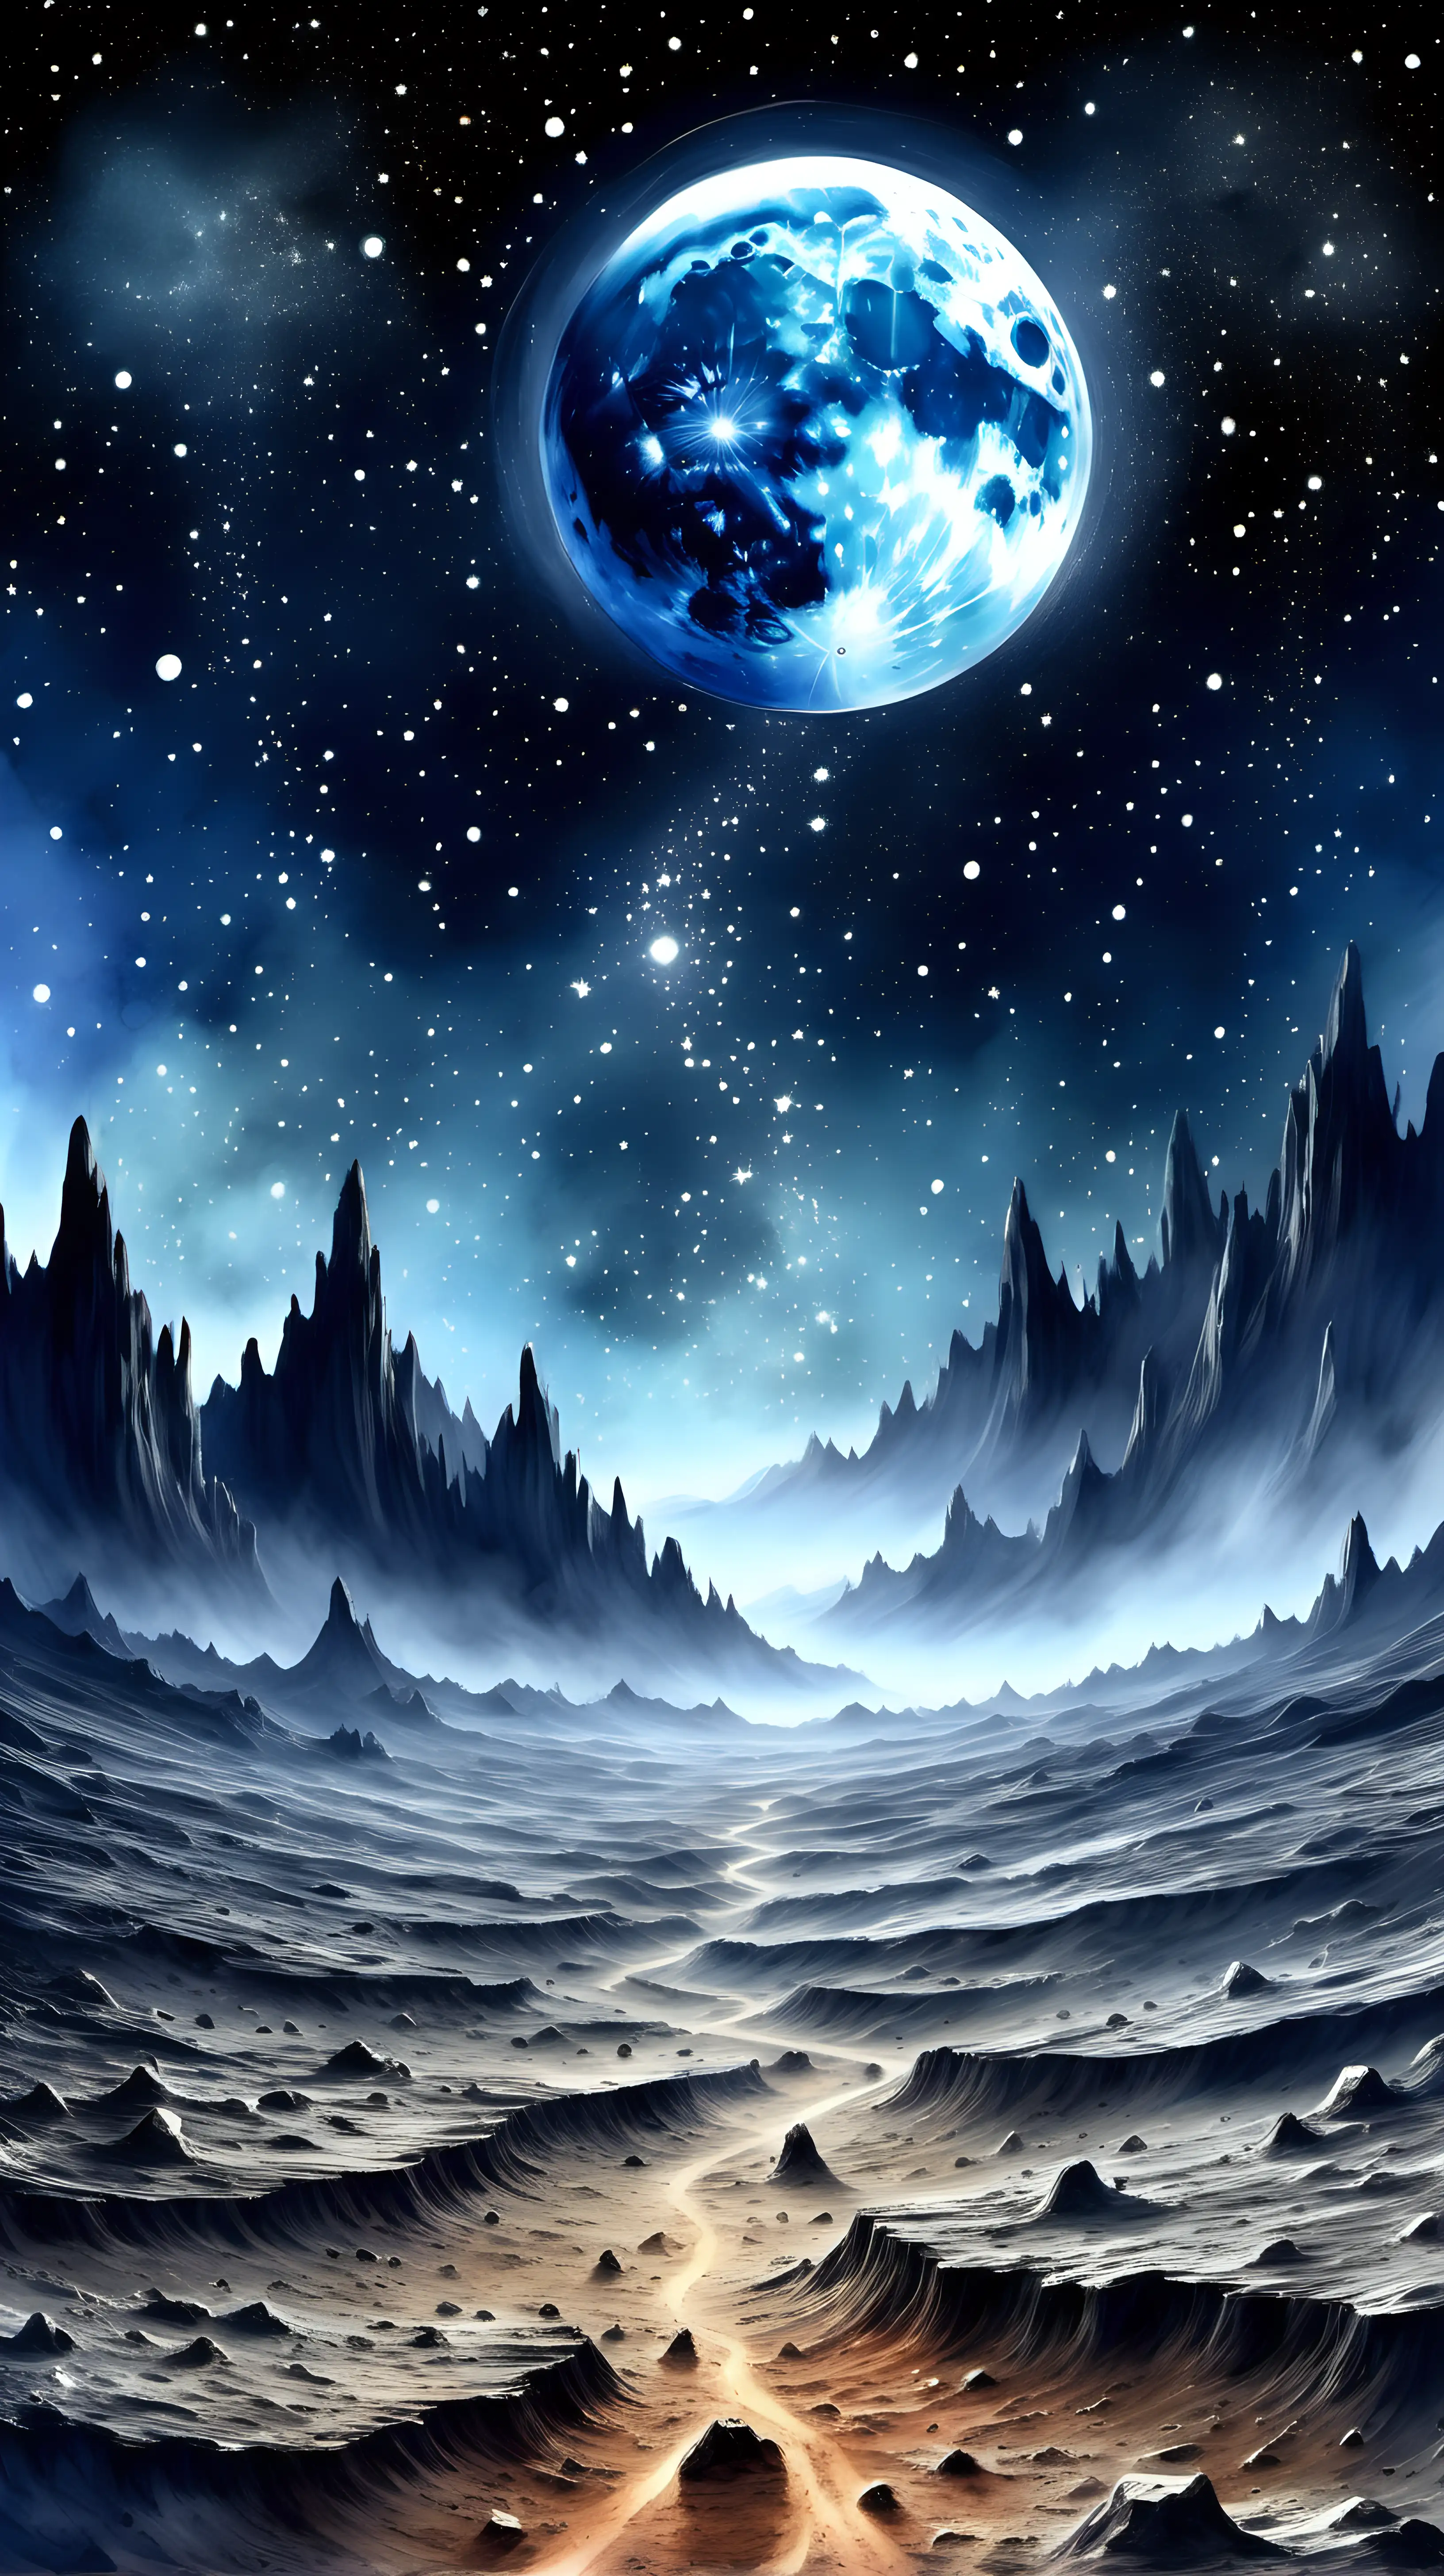 magical, ground shining beautiful image from the moon, moon landscape, earth in the background, many stars, earth in the background, use watercolor style